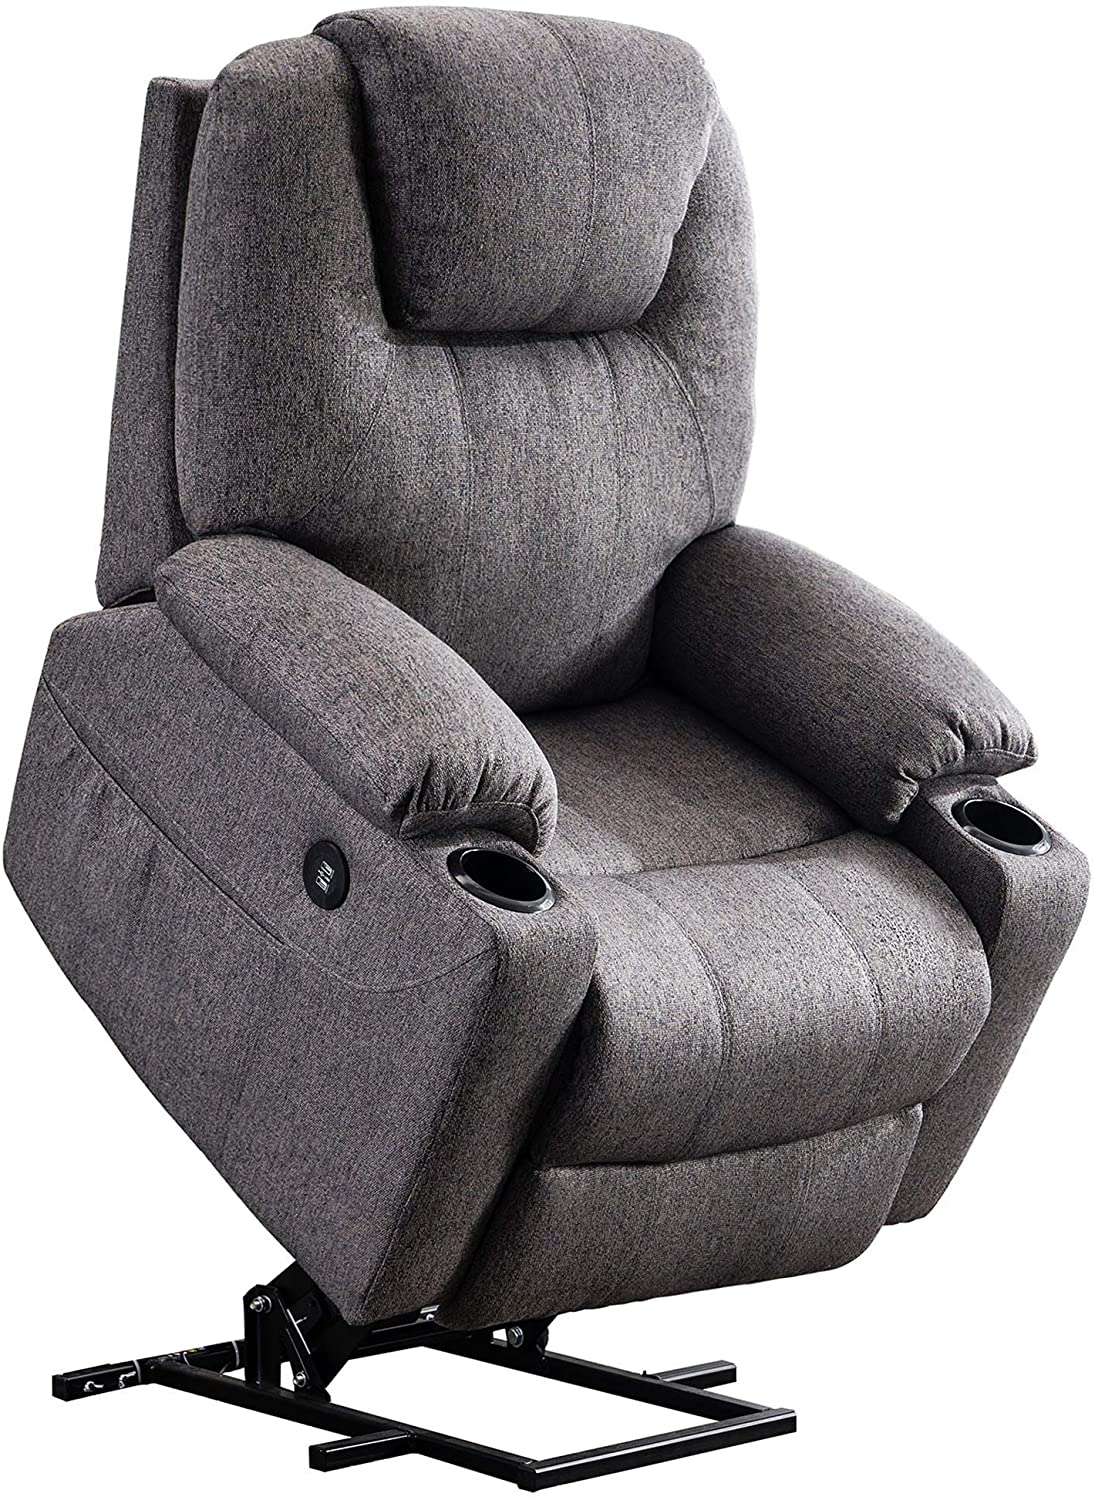 Electric Power Lift Recliner Chair